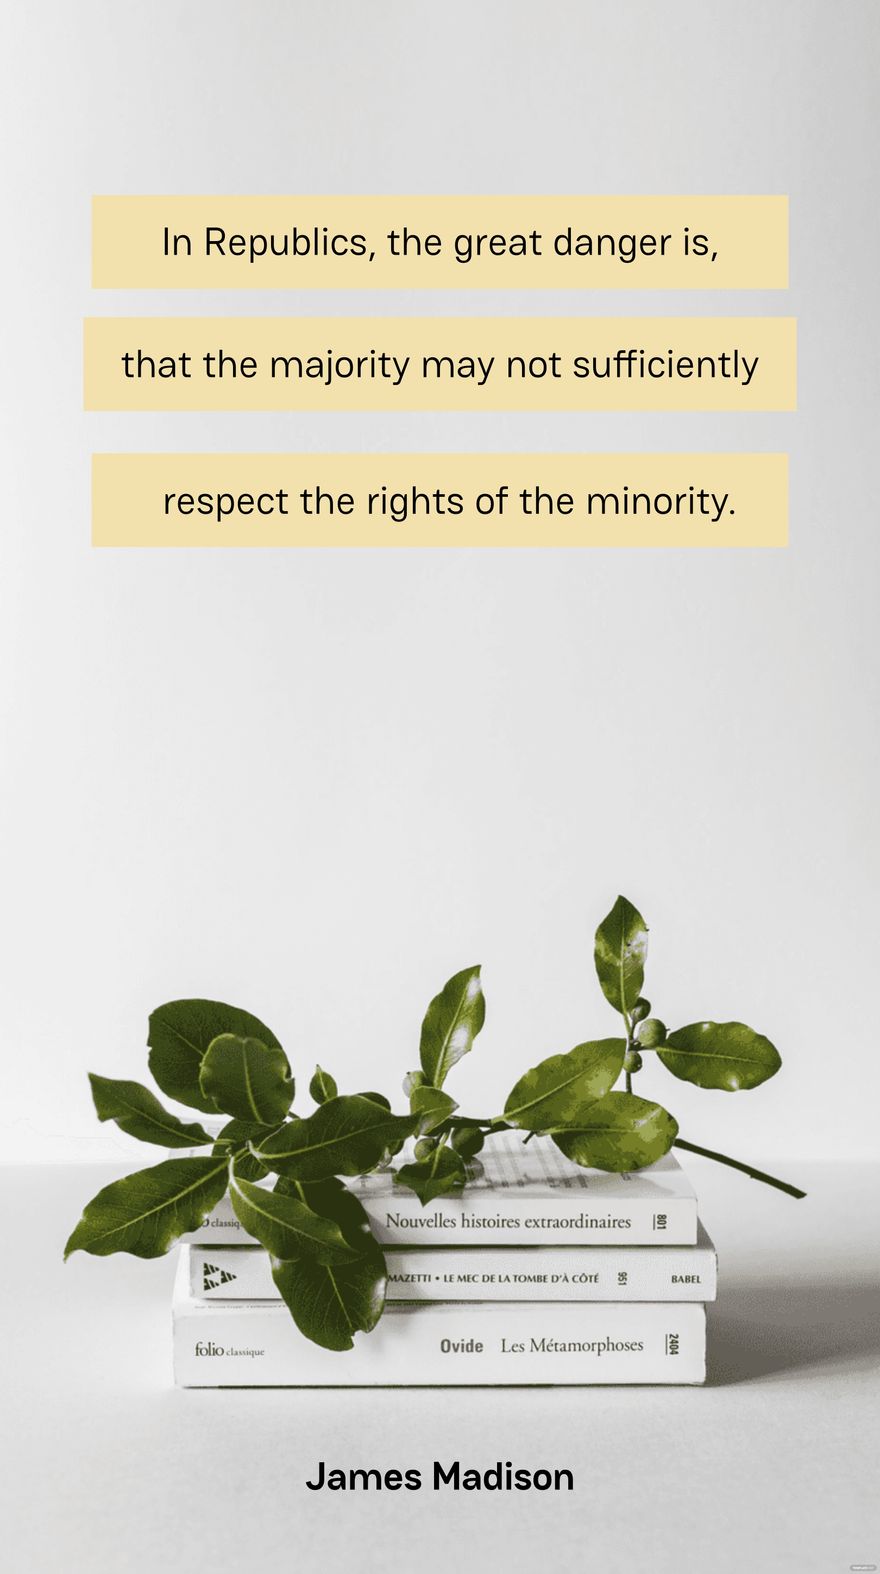 Free In Republics, the great danger is, that the majority may not sufficiently respect the rights of the minority. - James Madison in JPEG